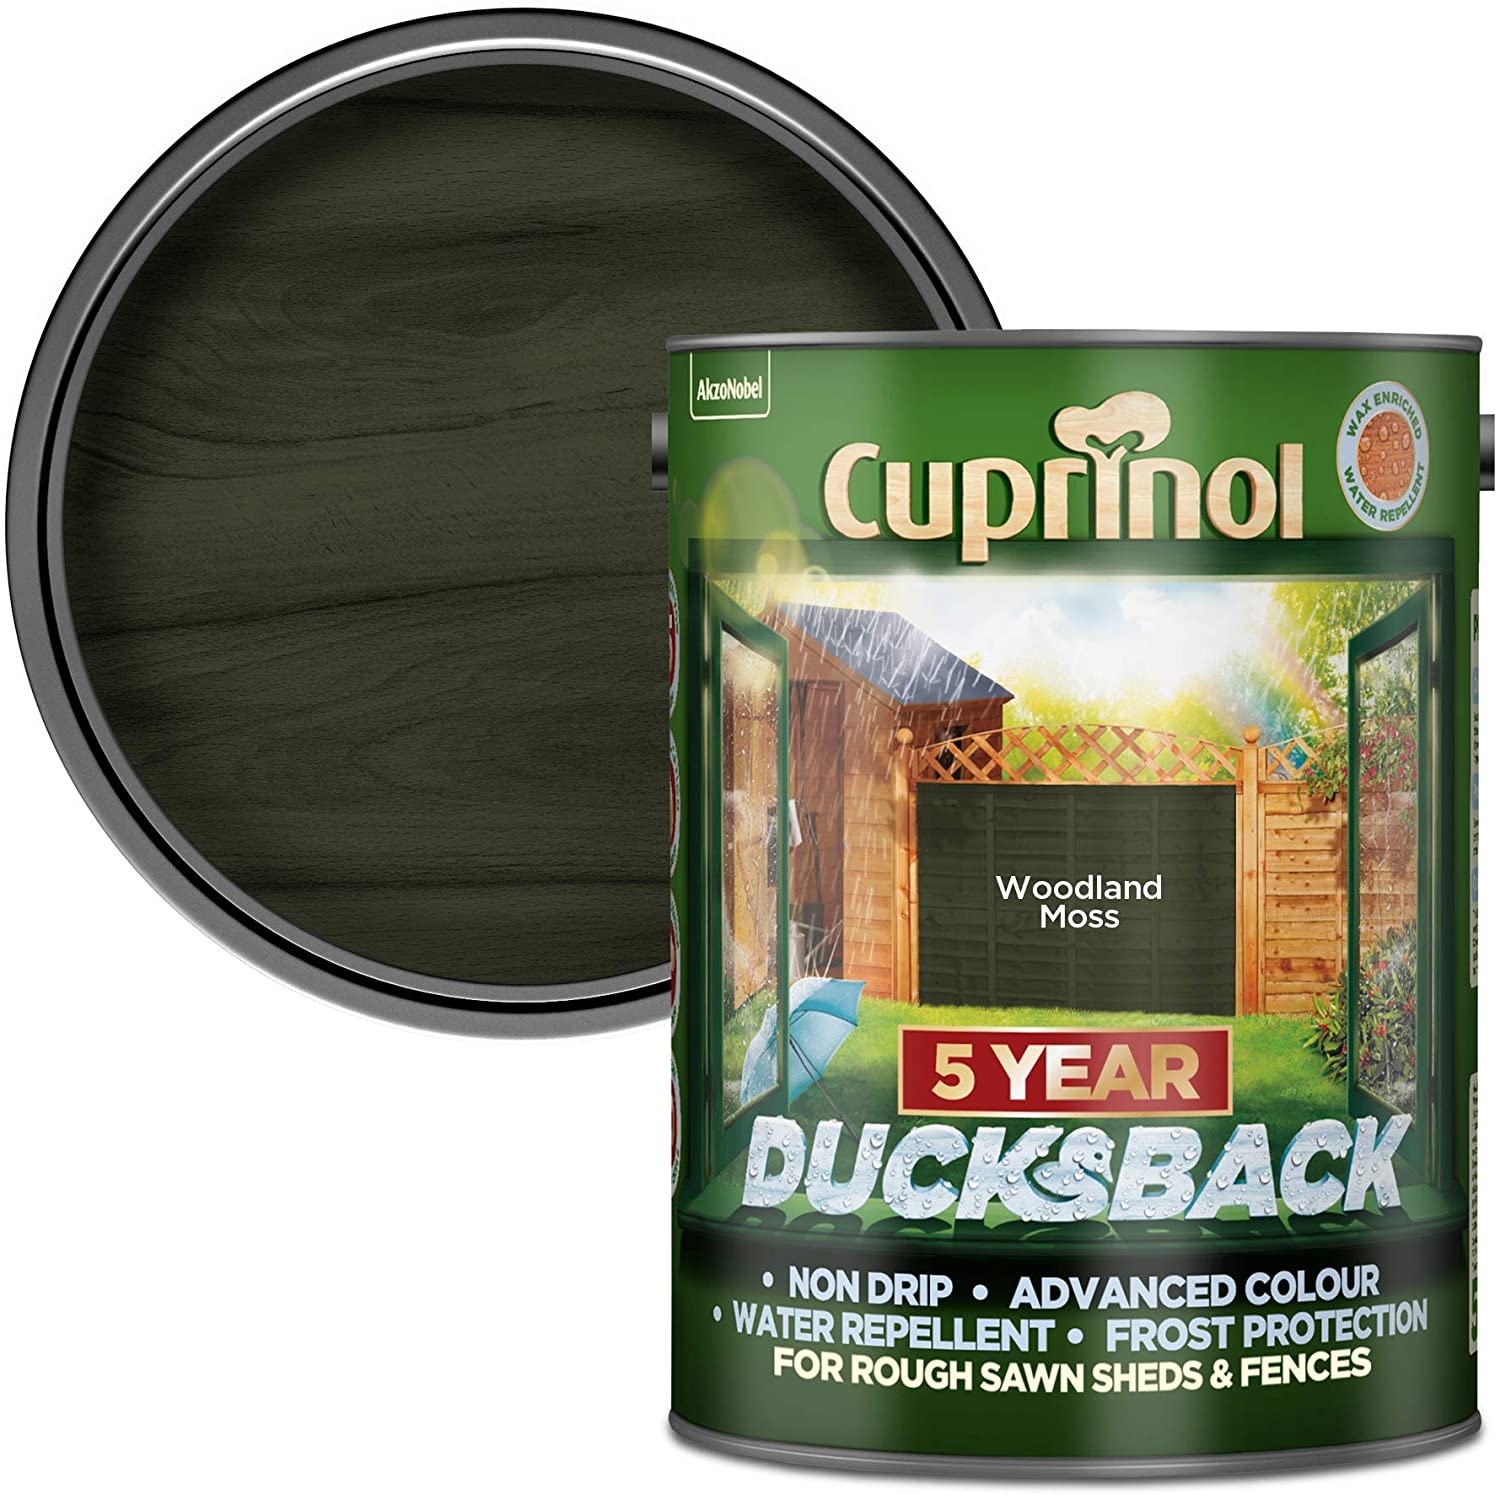 Cuprinol-Ducksback-5-Year-Waterproof-for-Sheds-and-Fences-Woodland-Moss-5-Litre